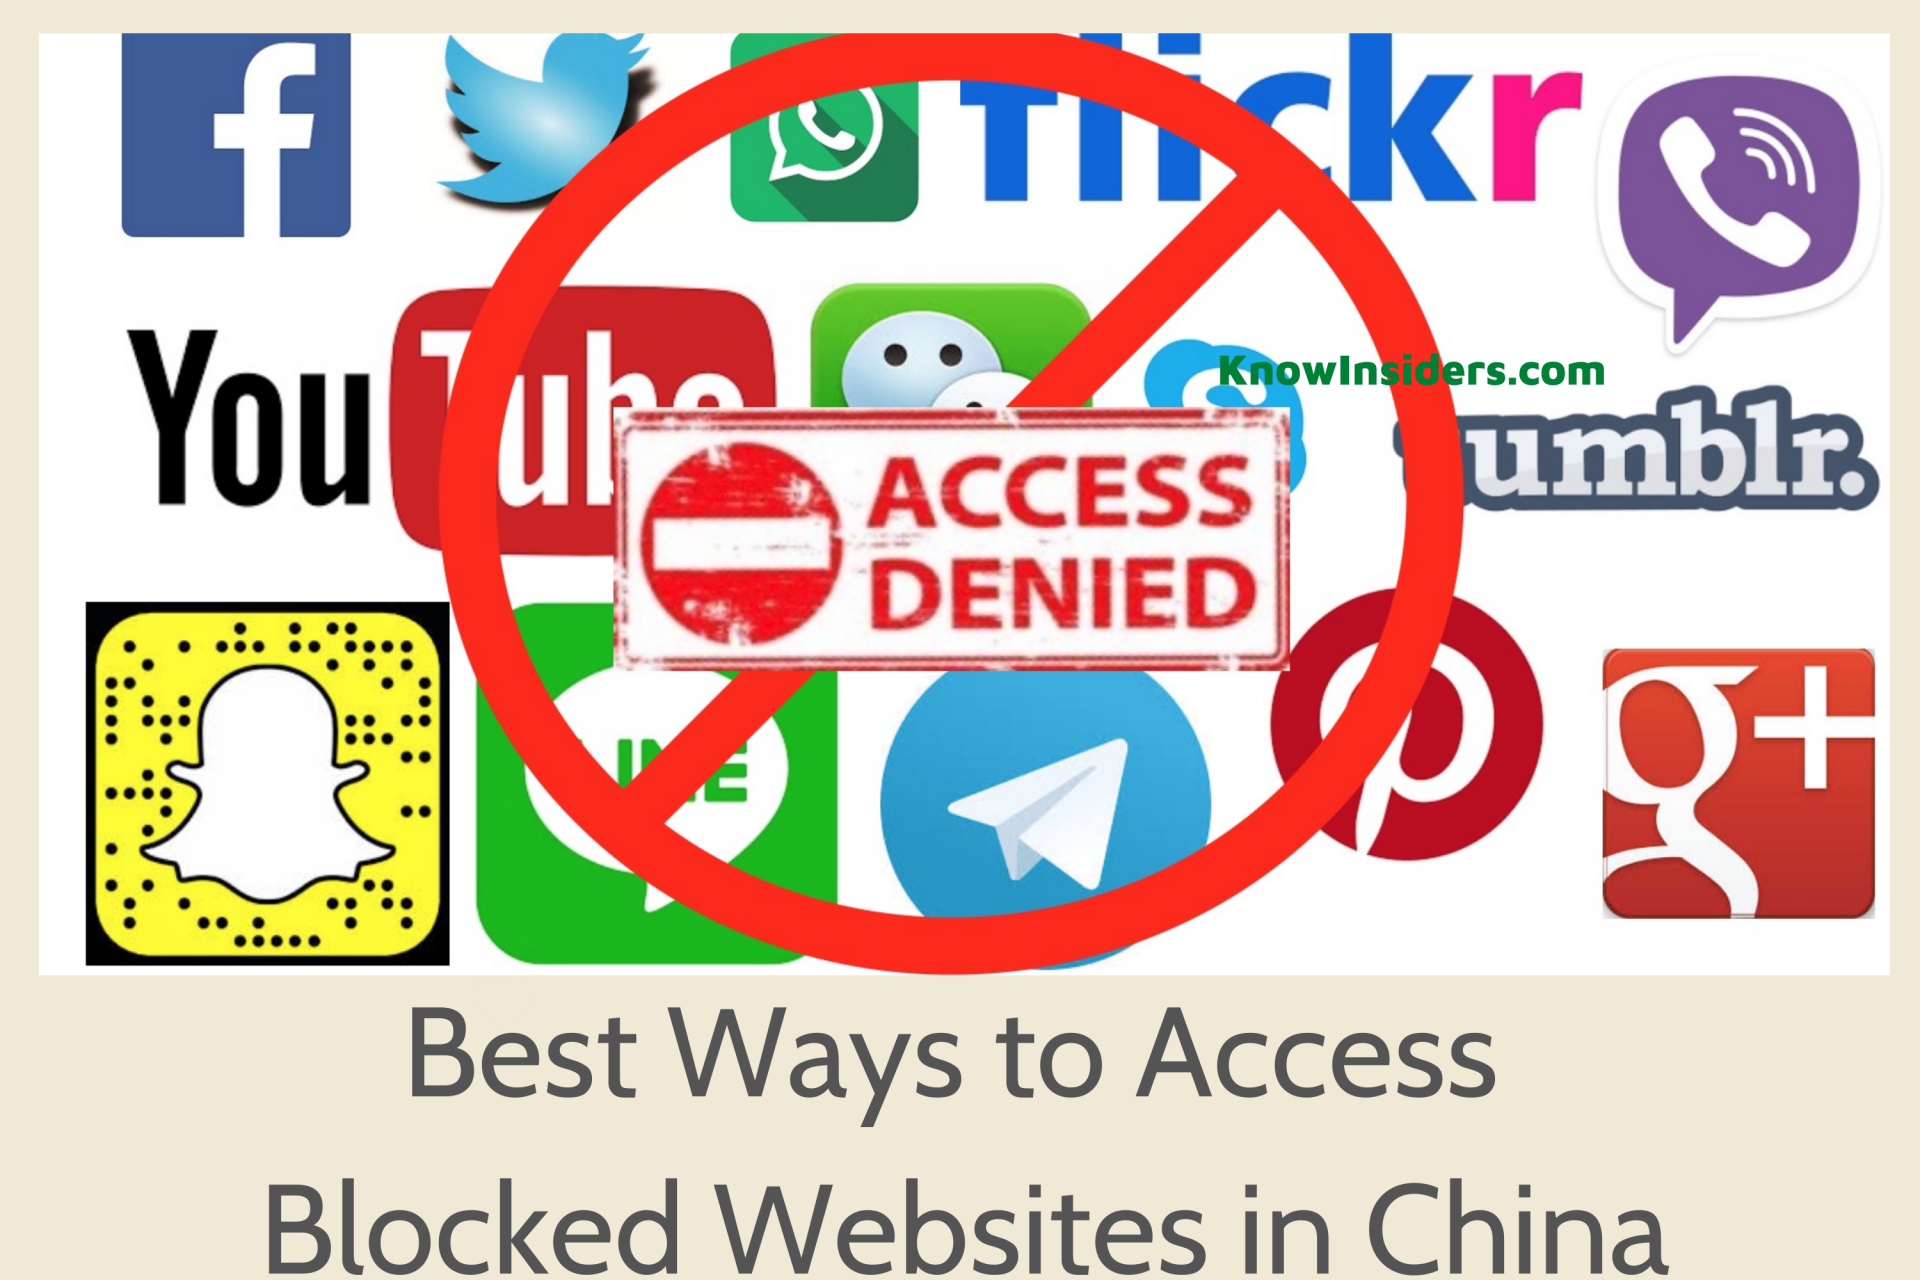 How to Access Blocked Websites in China